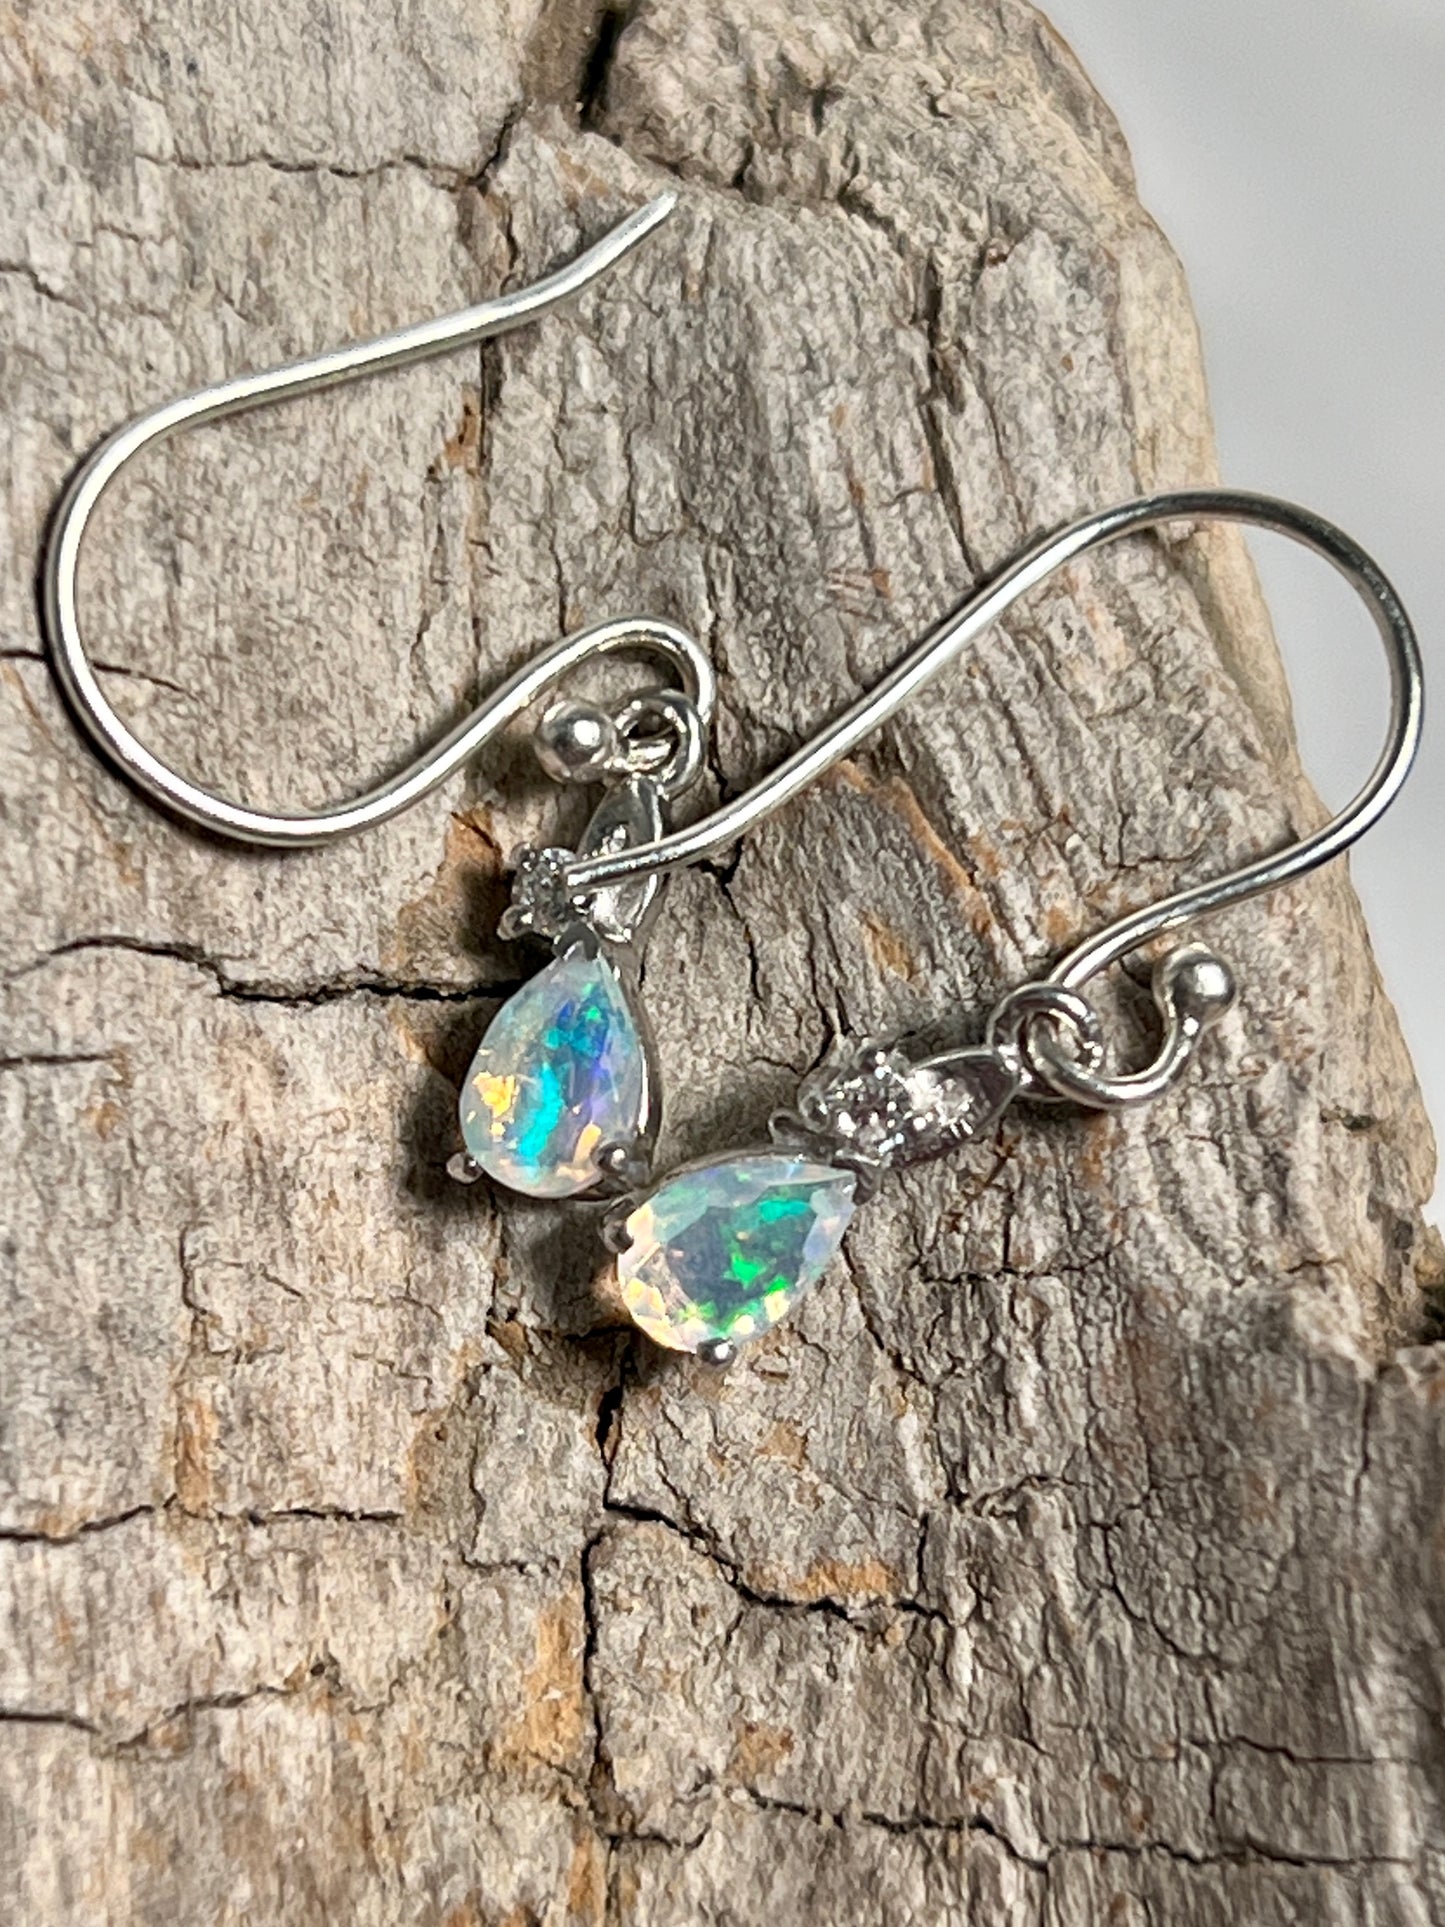 
                  
                    A pair of Tiny Teardrop Ethiopian Opal Earrings sparkling on a piece of wood, by Super Silver.
                  
                